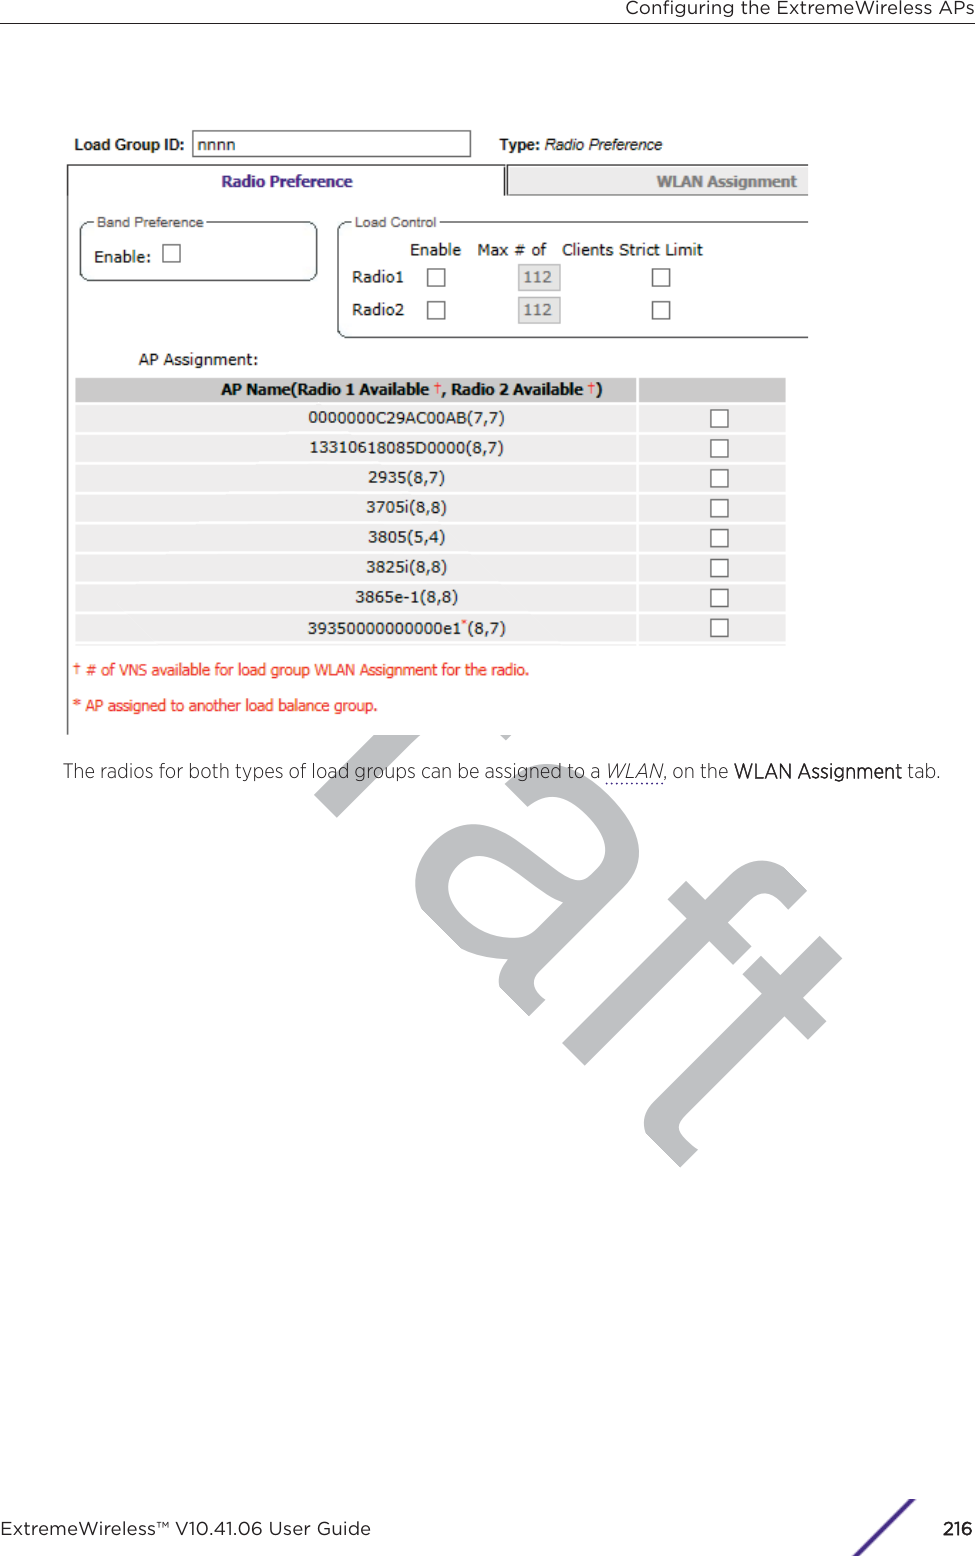 DraftThe radios for both types of load groups can be assigned to a WLAN, on the WWLAN Assignment tab.Conﬁguring the ExtremeWireless APsExtremeWireless™ V10.41.06 User Guide216